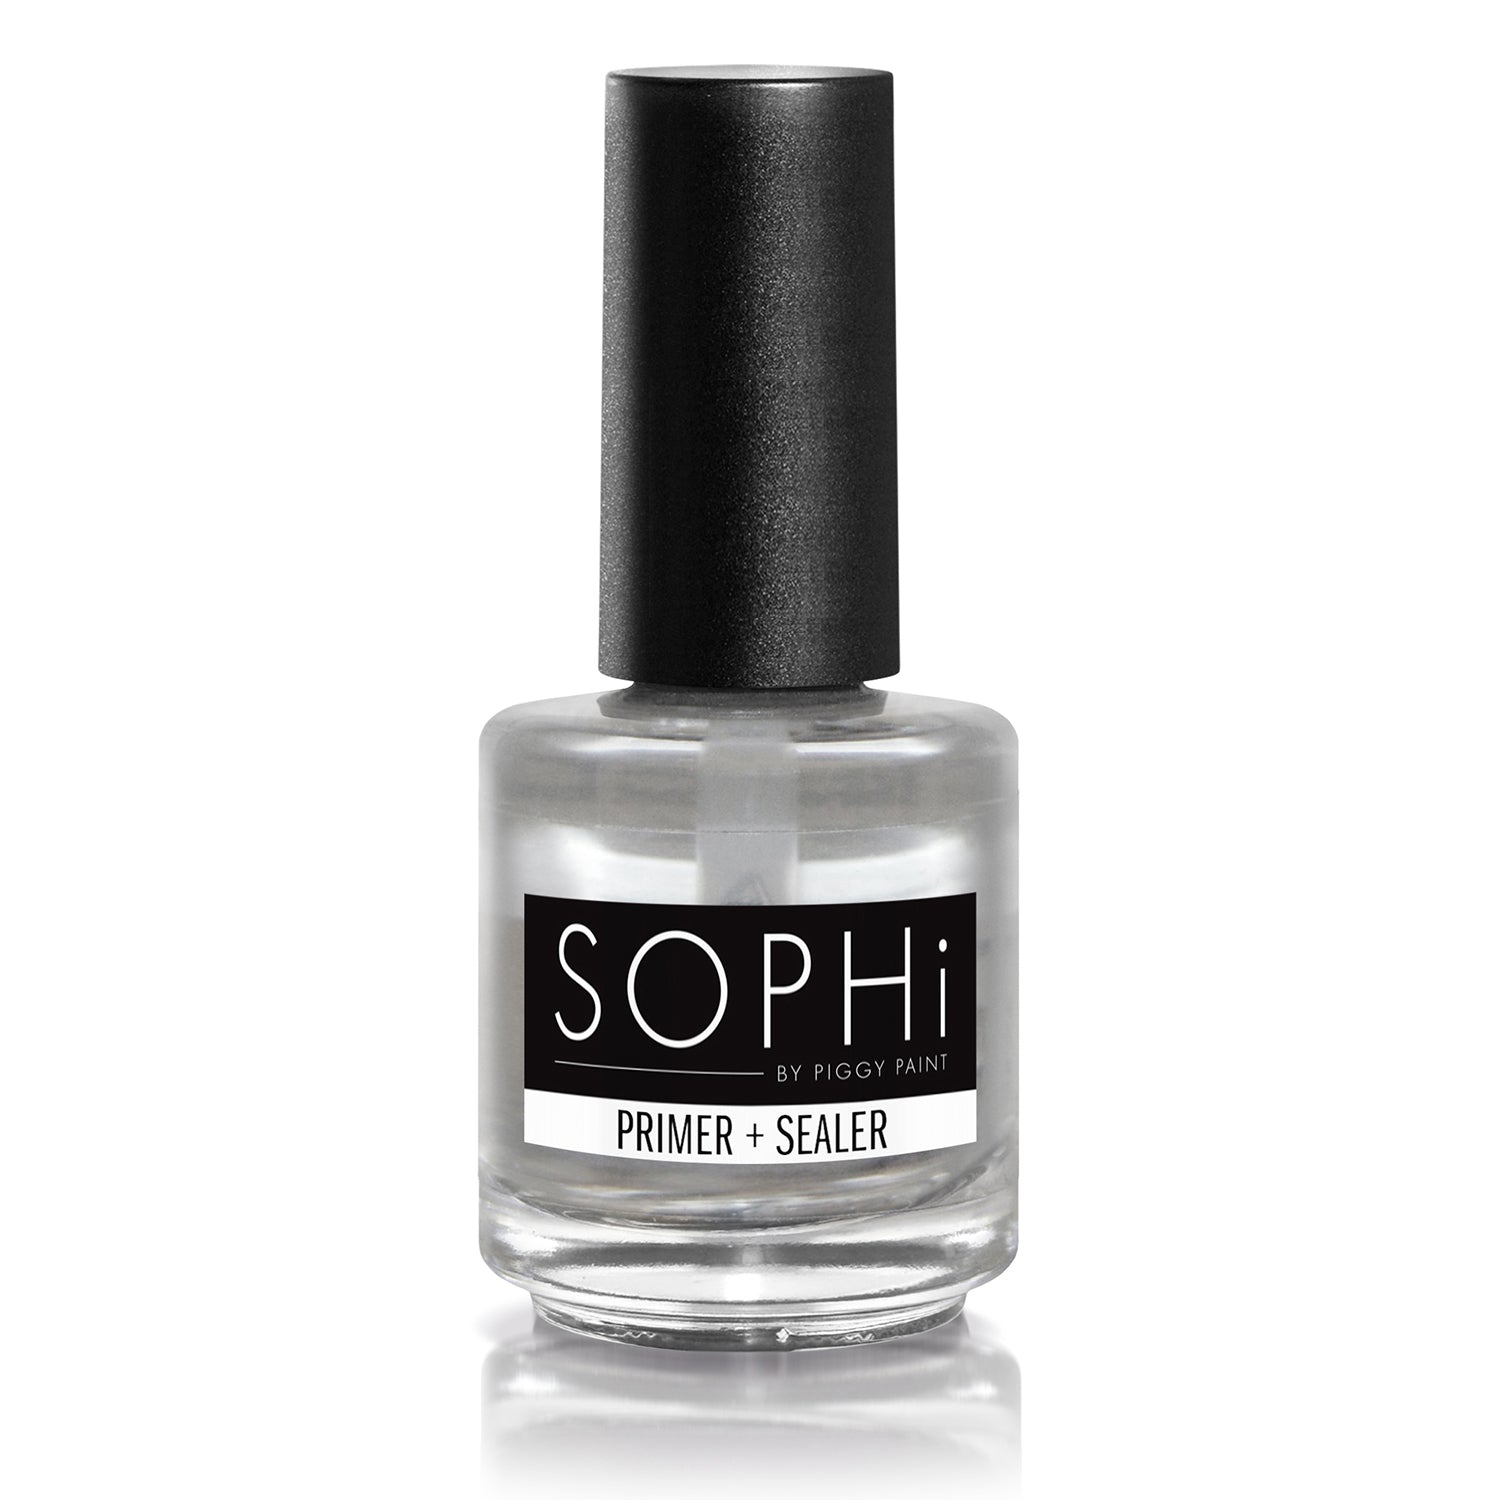 Piggy Paint and SOPHi I Review 